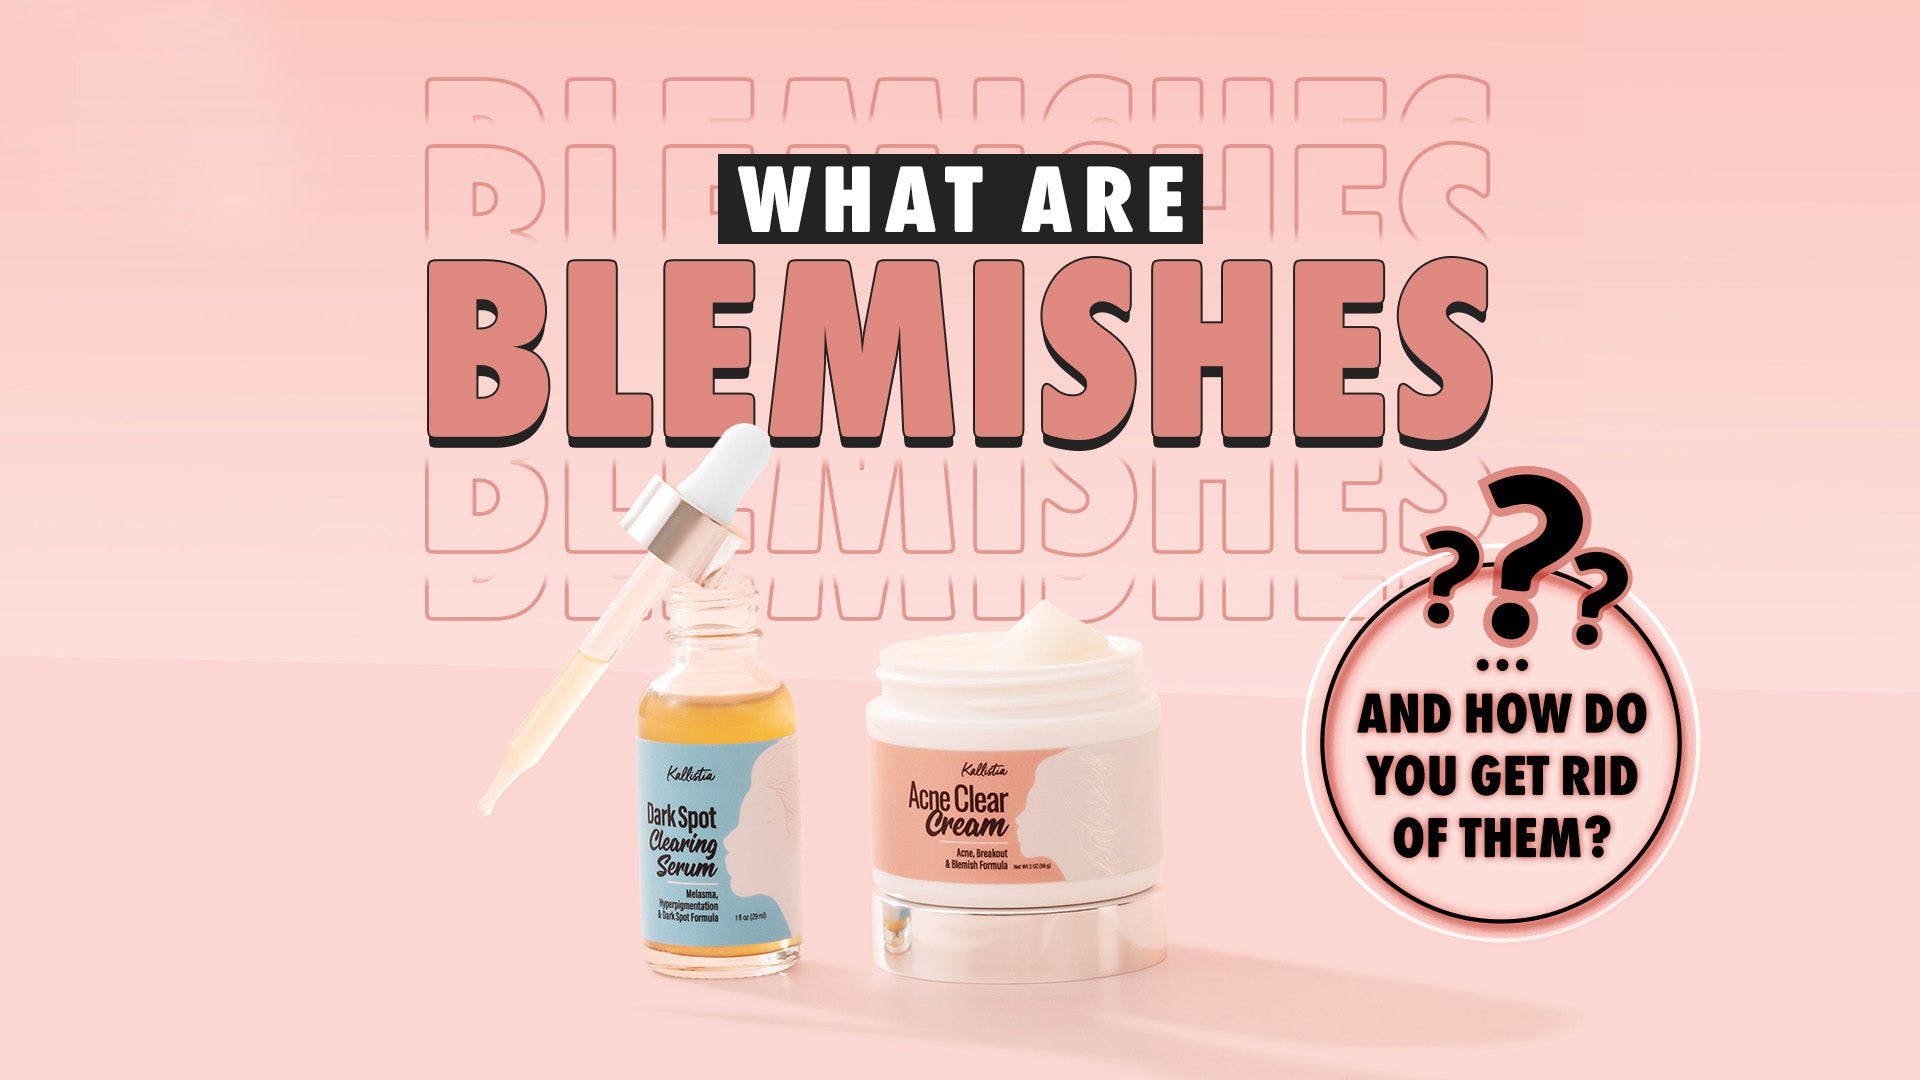 What are blemishes...